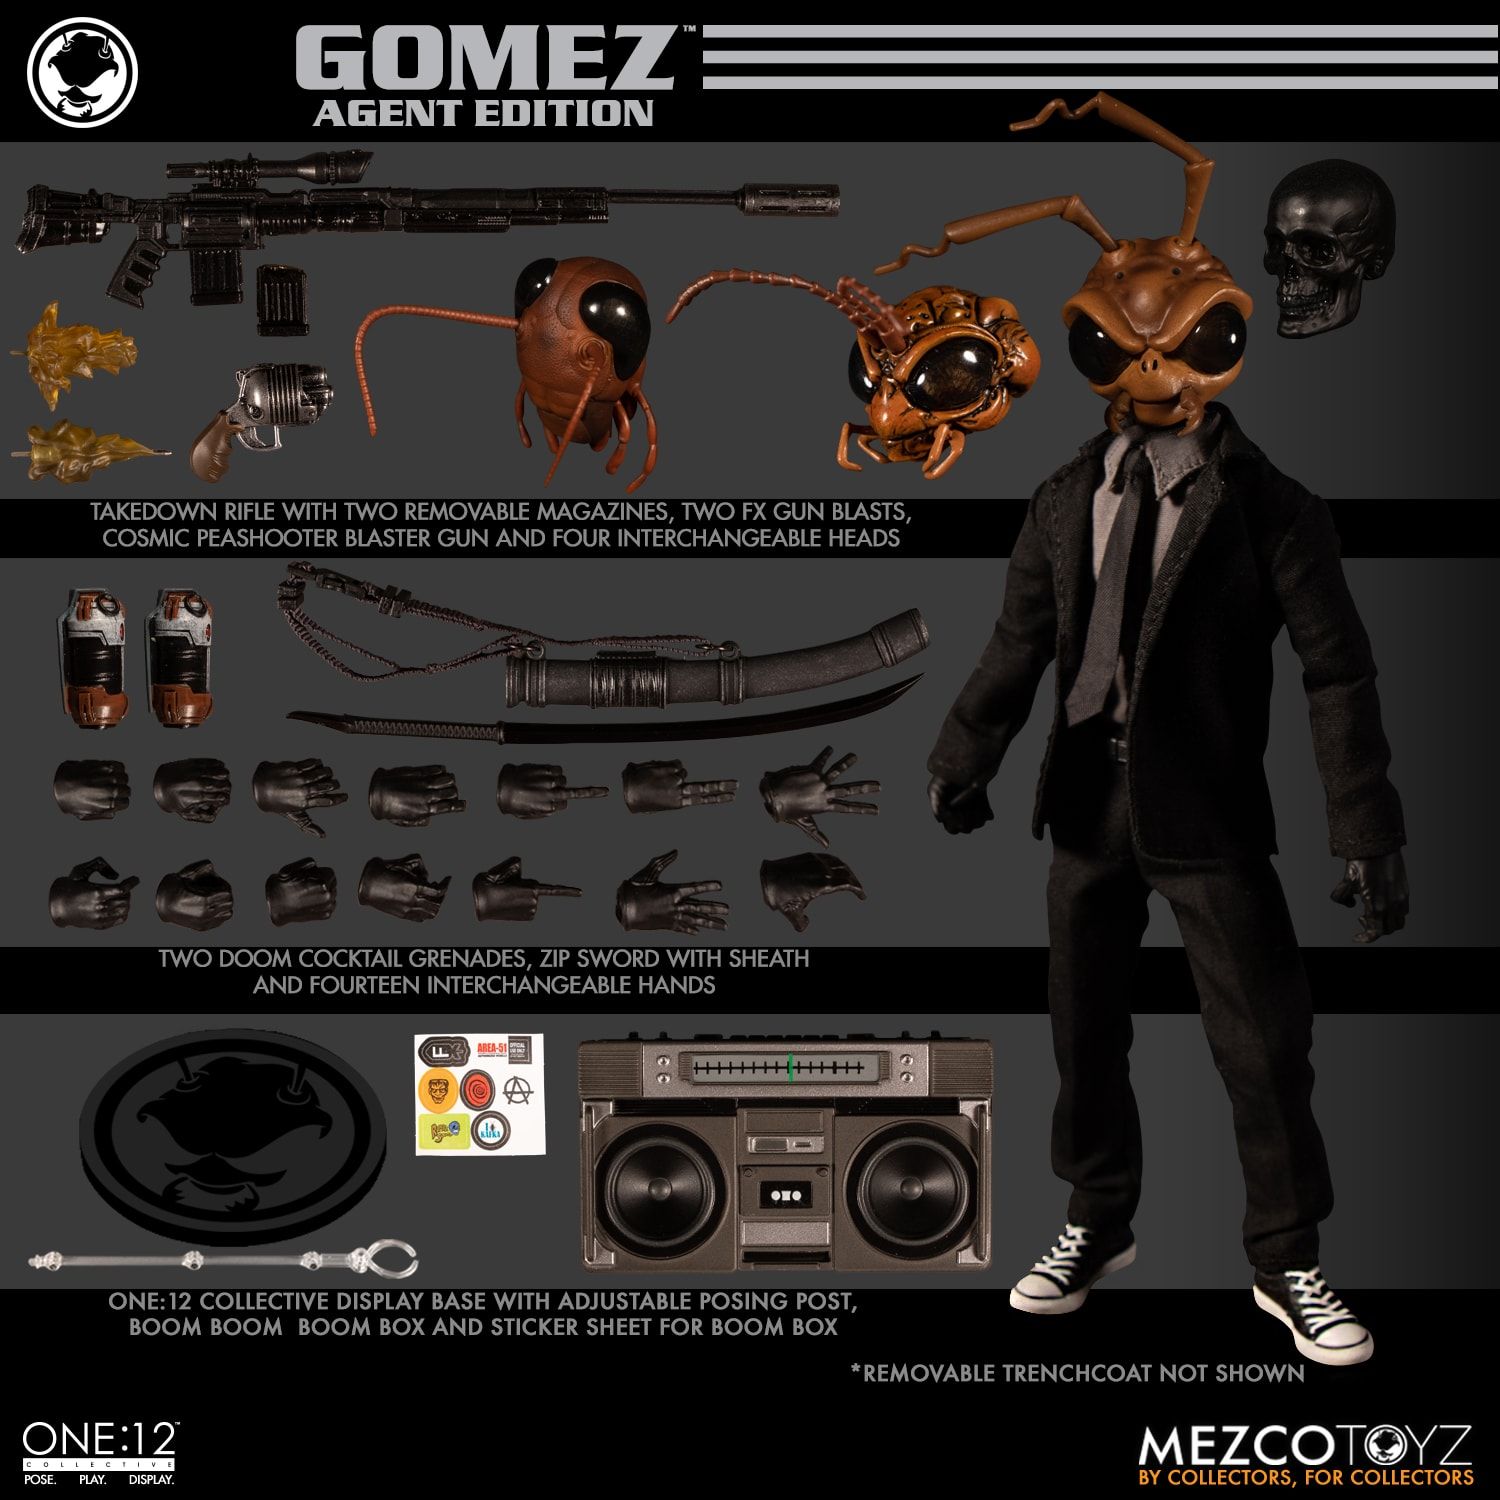 One:12 Collective Gomez - Agent Edition 